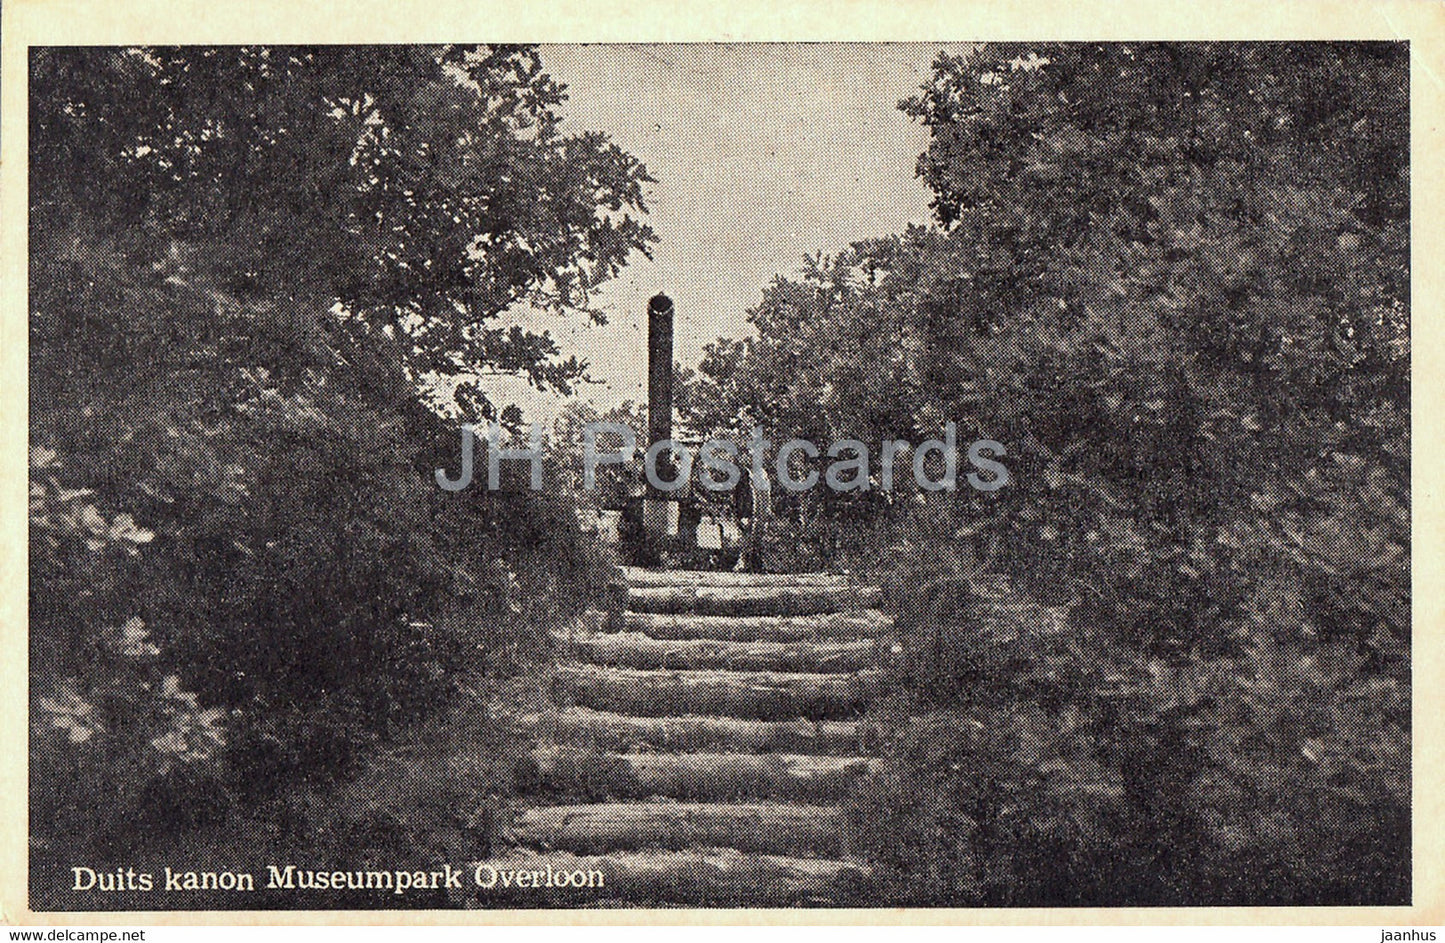 Duits Kanon Museumpark Overloon - cannon - museum - old postcard - Netherlands - unused - JH Postcards